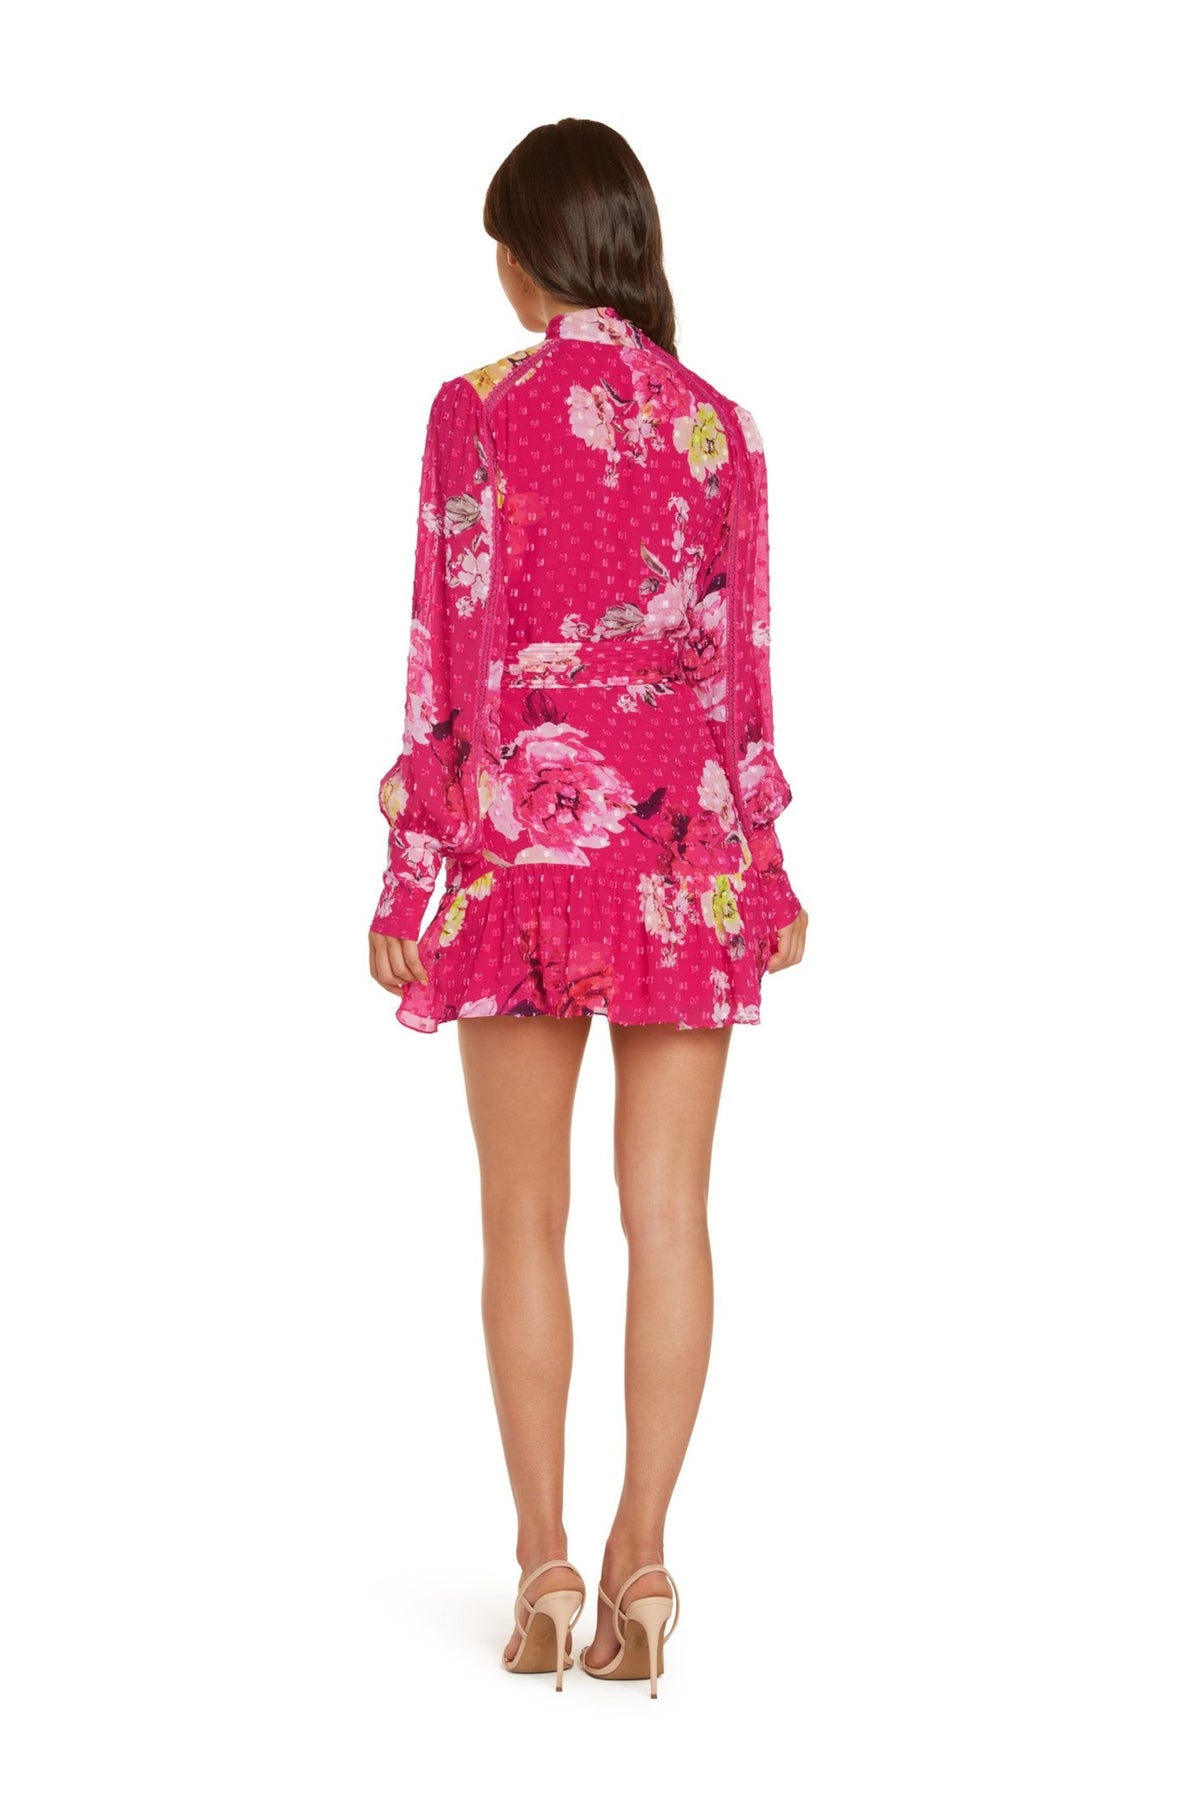 Madison Long Sleeve Mini Dress in Hot Pink Floral